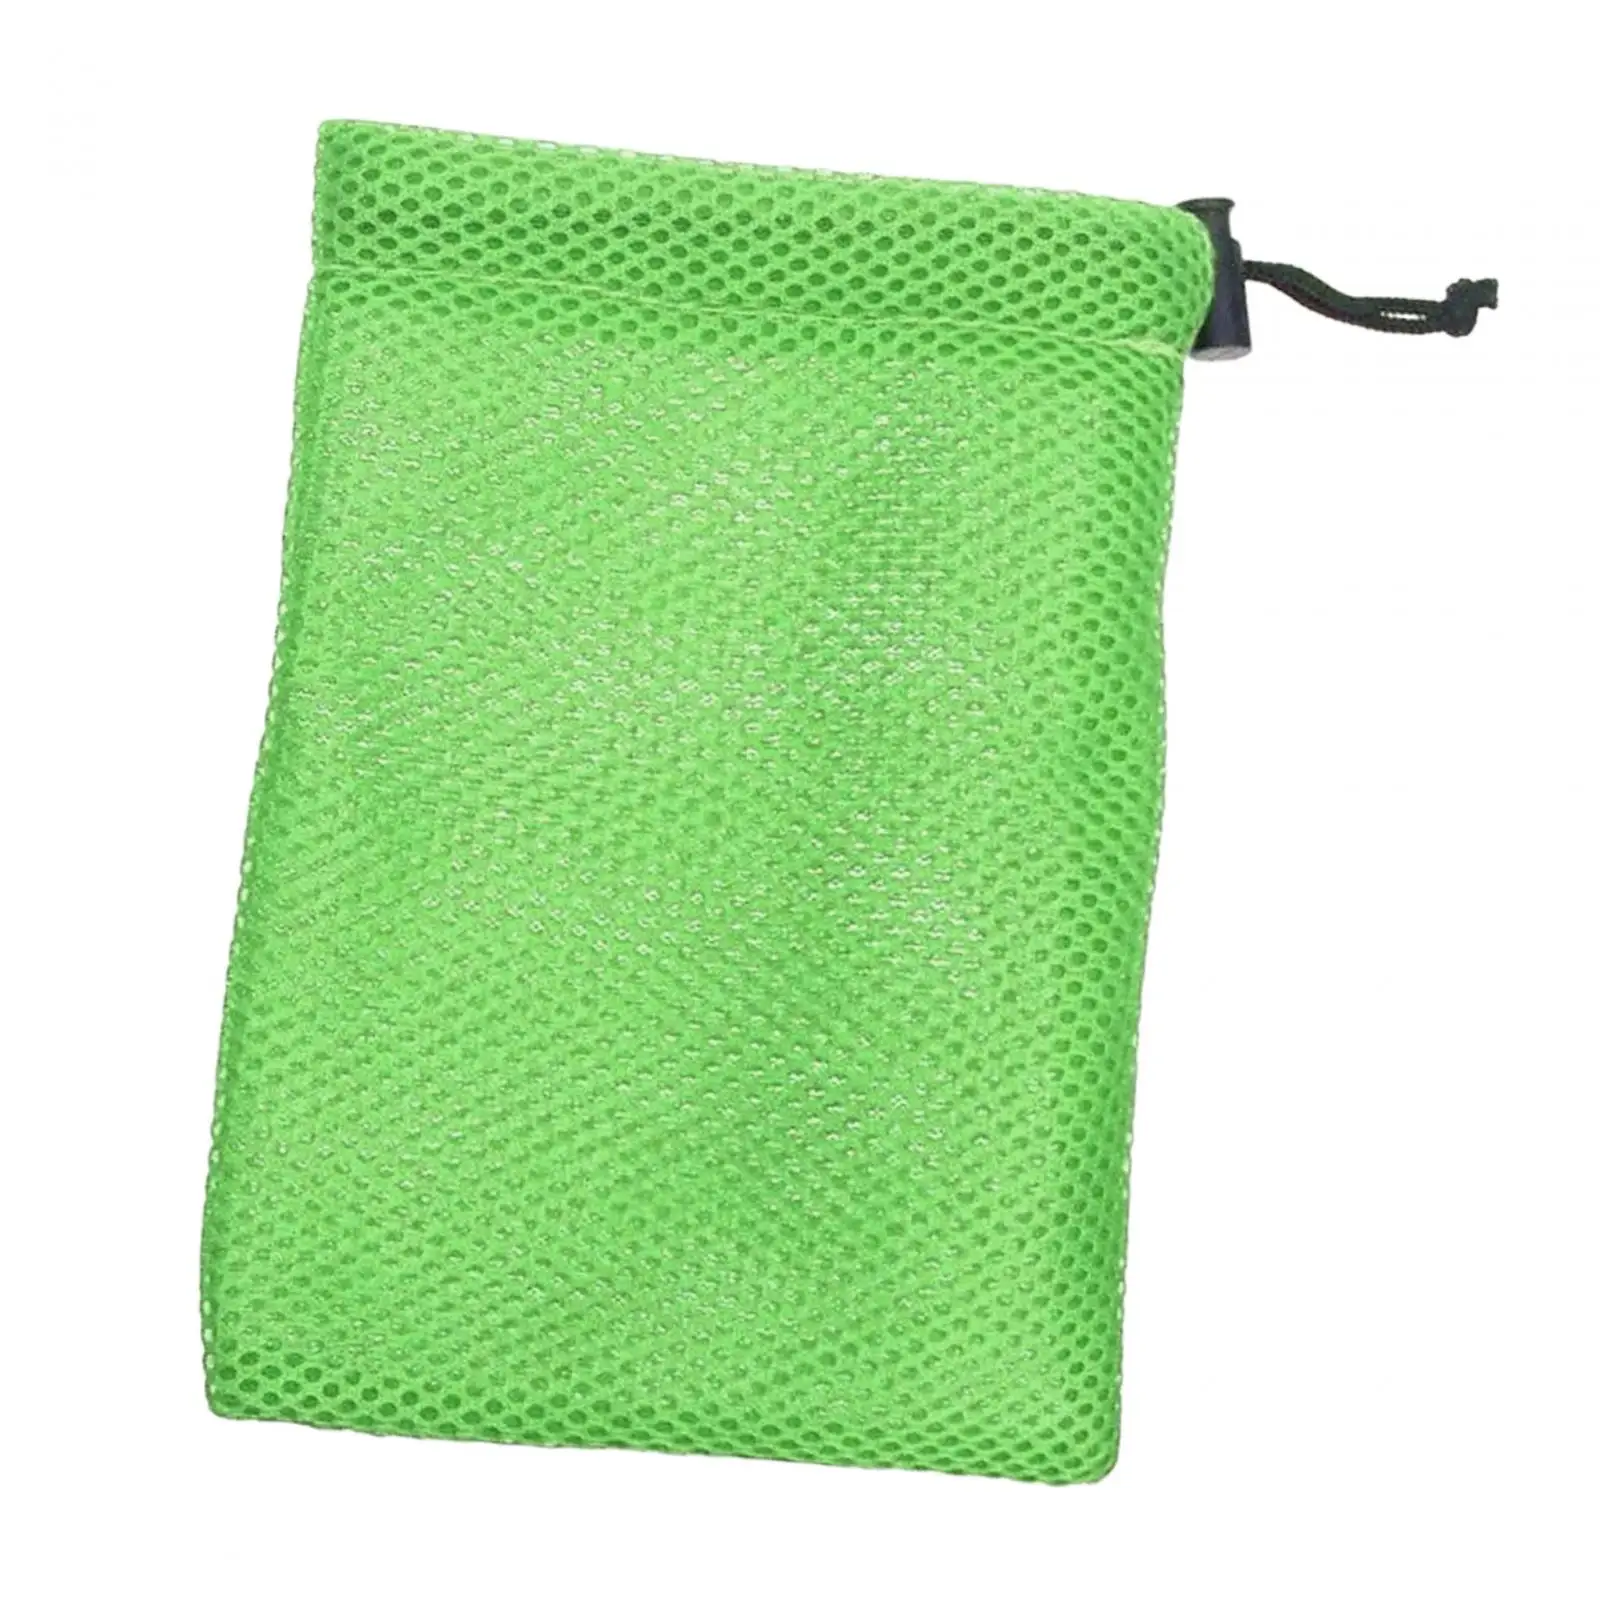 Small Mesh Drawstring Bag Stuff Sack Multipurpose Durable Storage Pouch Mesh Bag for Cosmetics, Collecting Toys, Golf Balls